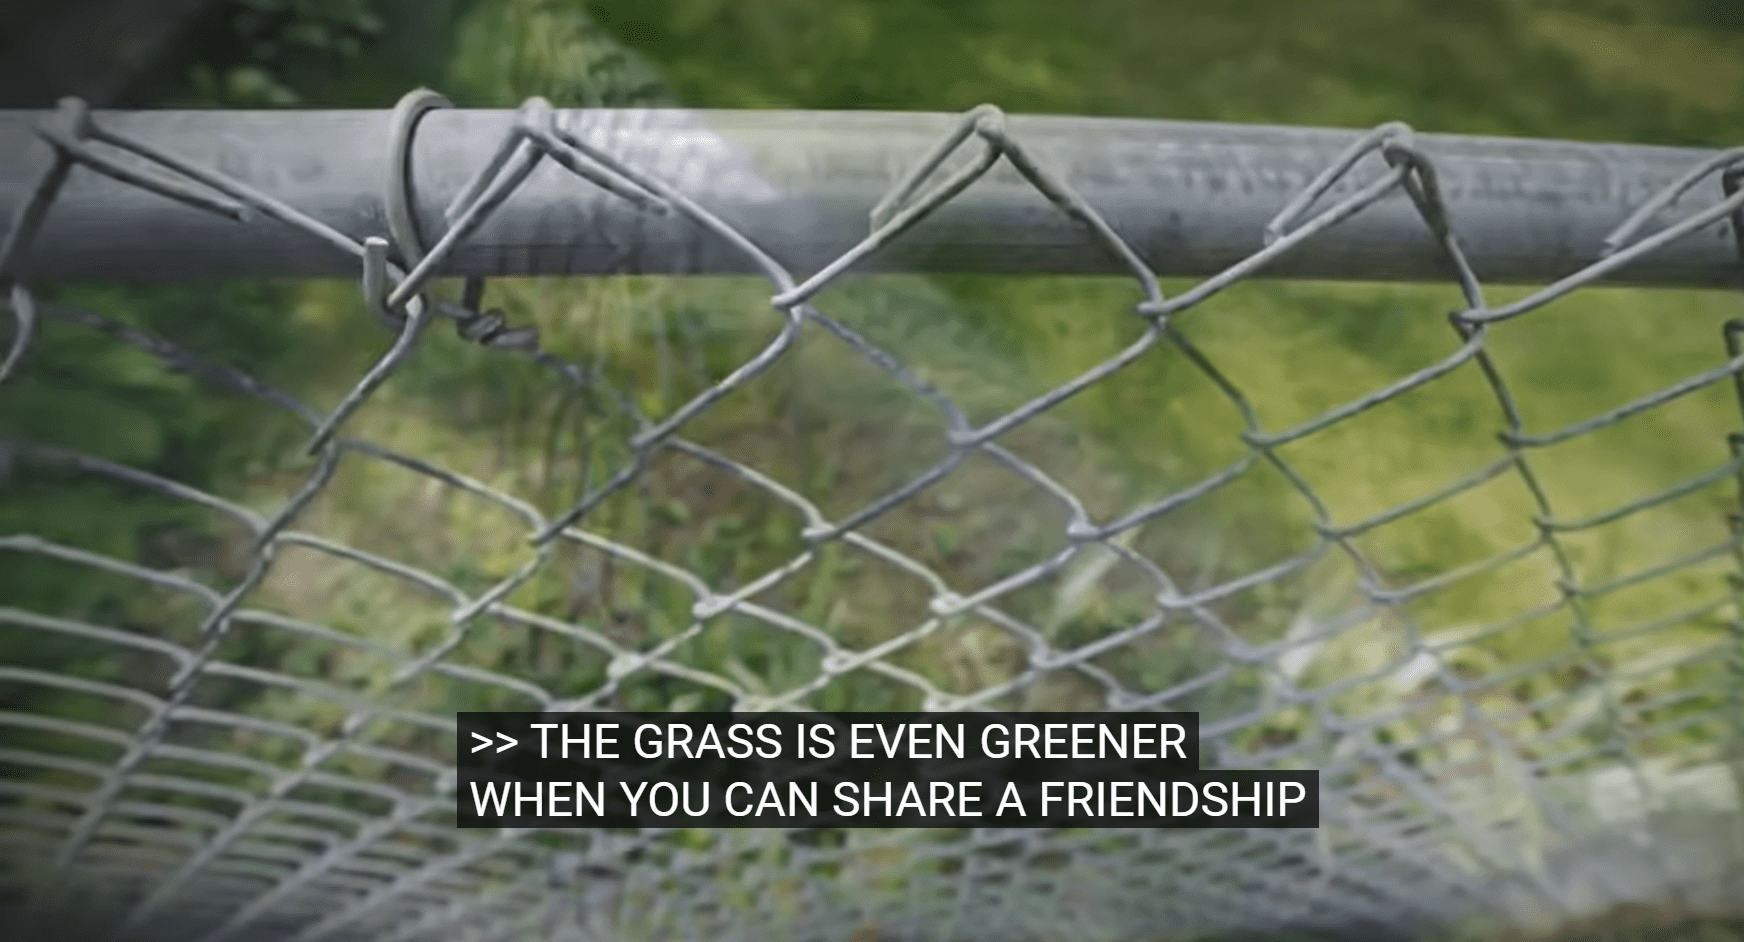  A quote from a video about Mary O’Neill and Benjamin Olson’s friendship. | Source: Youtube.com/KARE 11